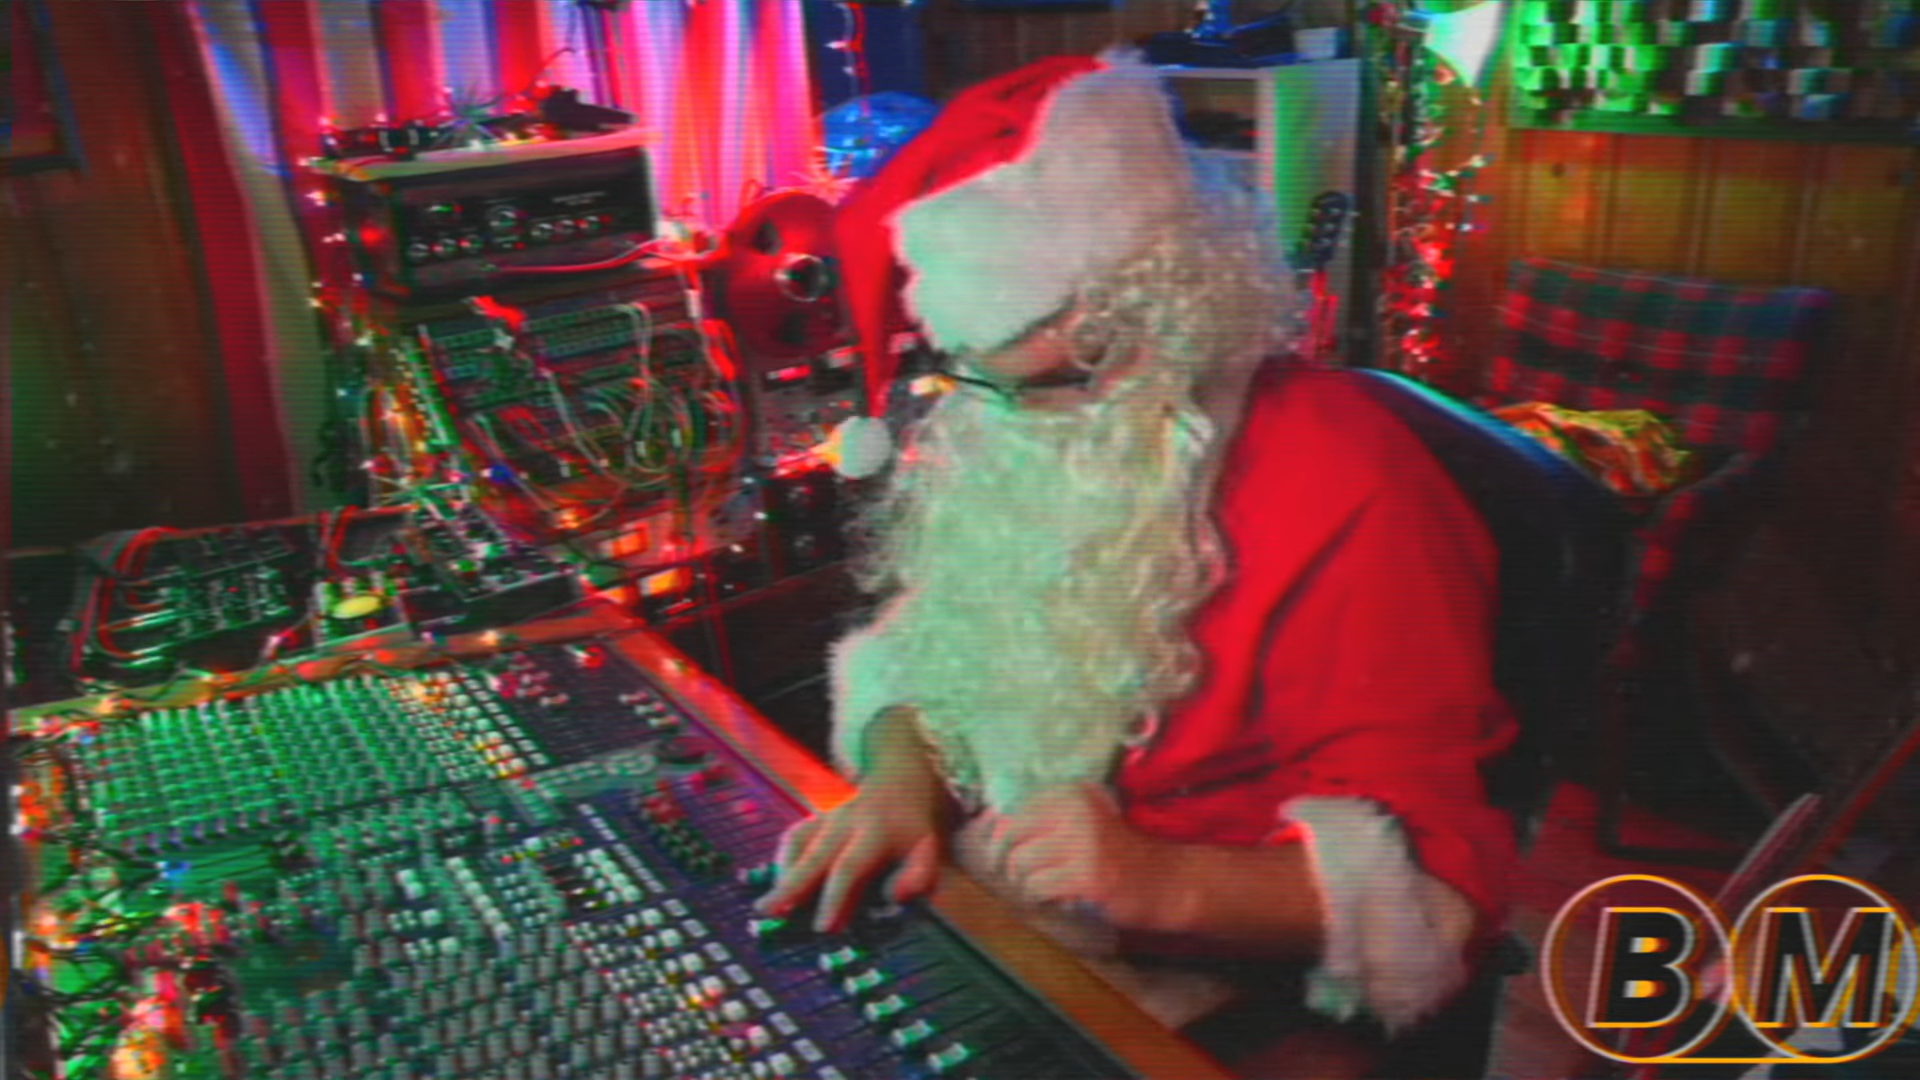 Just in time to put us all into a Merry Christmas vibe, Black Market Dub dropped a video of their reggae version of “Santa Claus Is Coming To Town,"